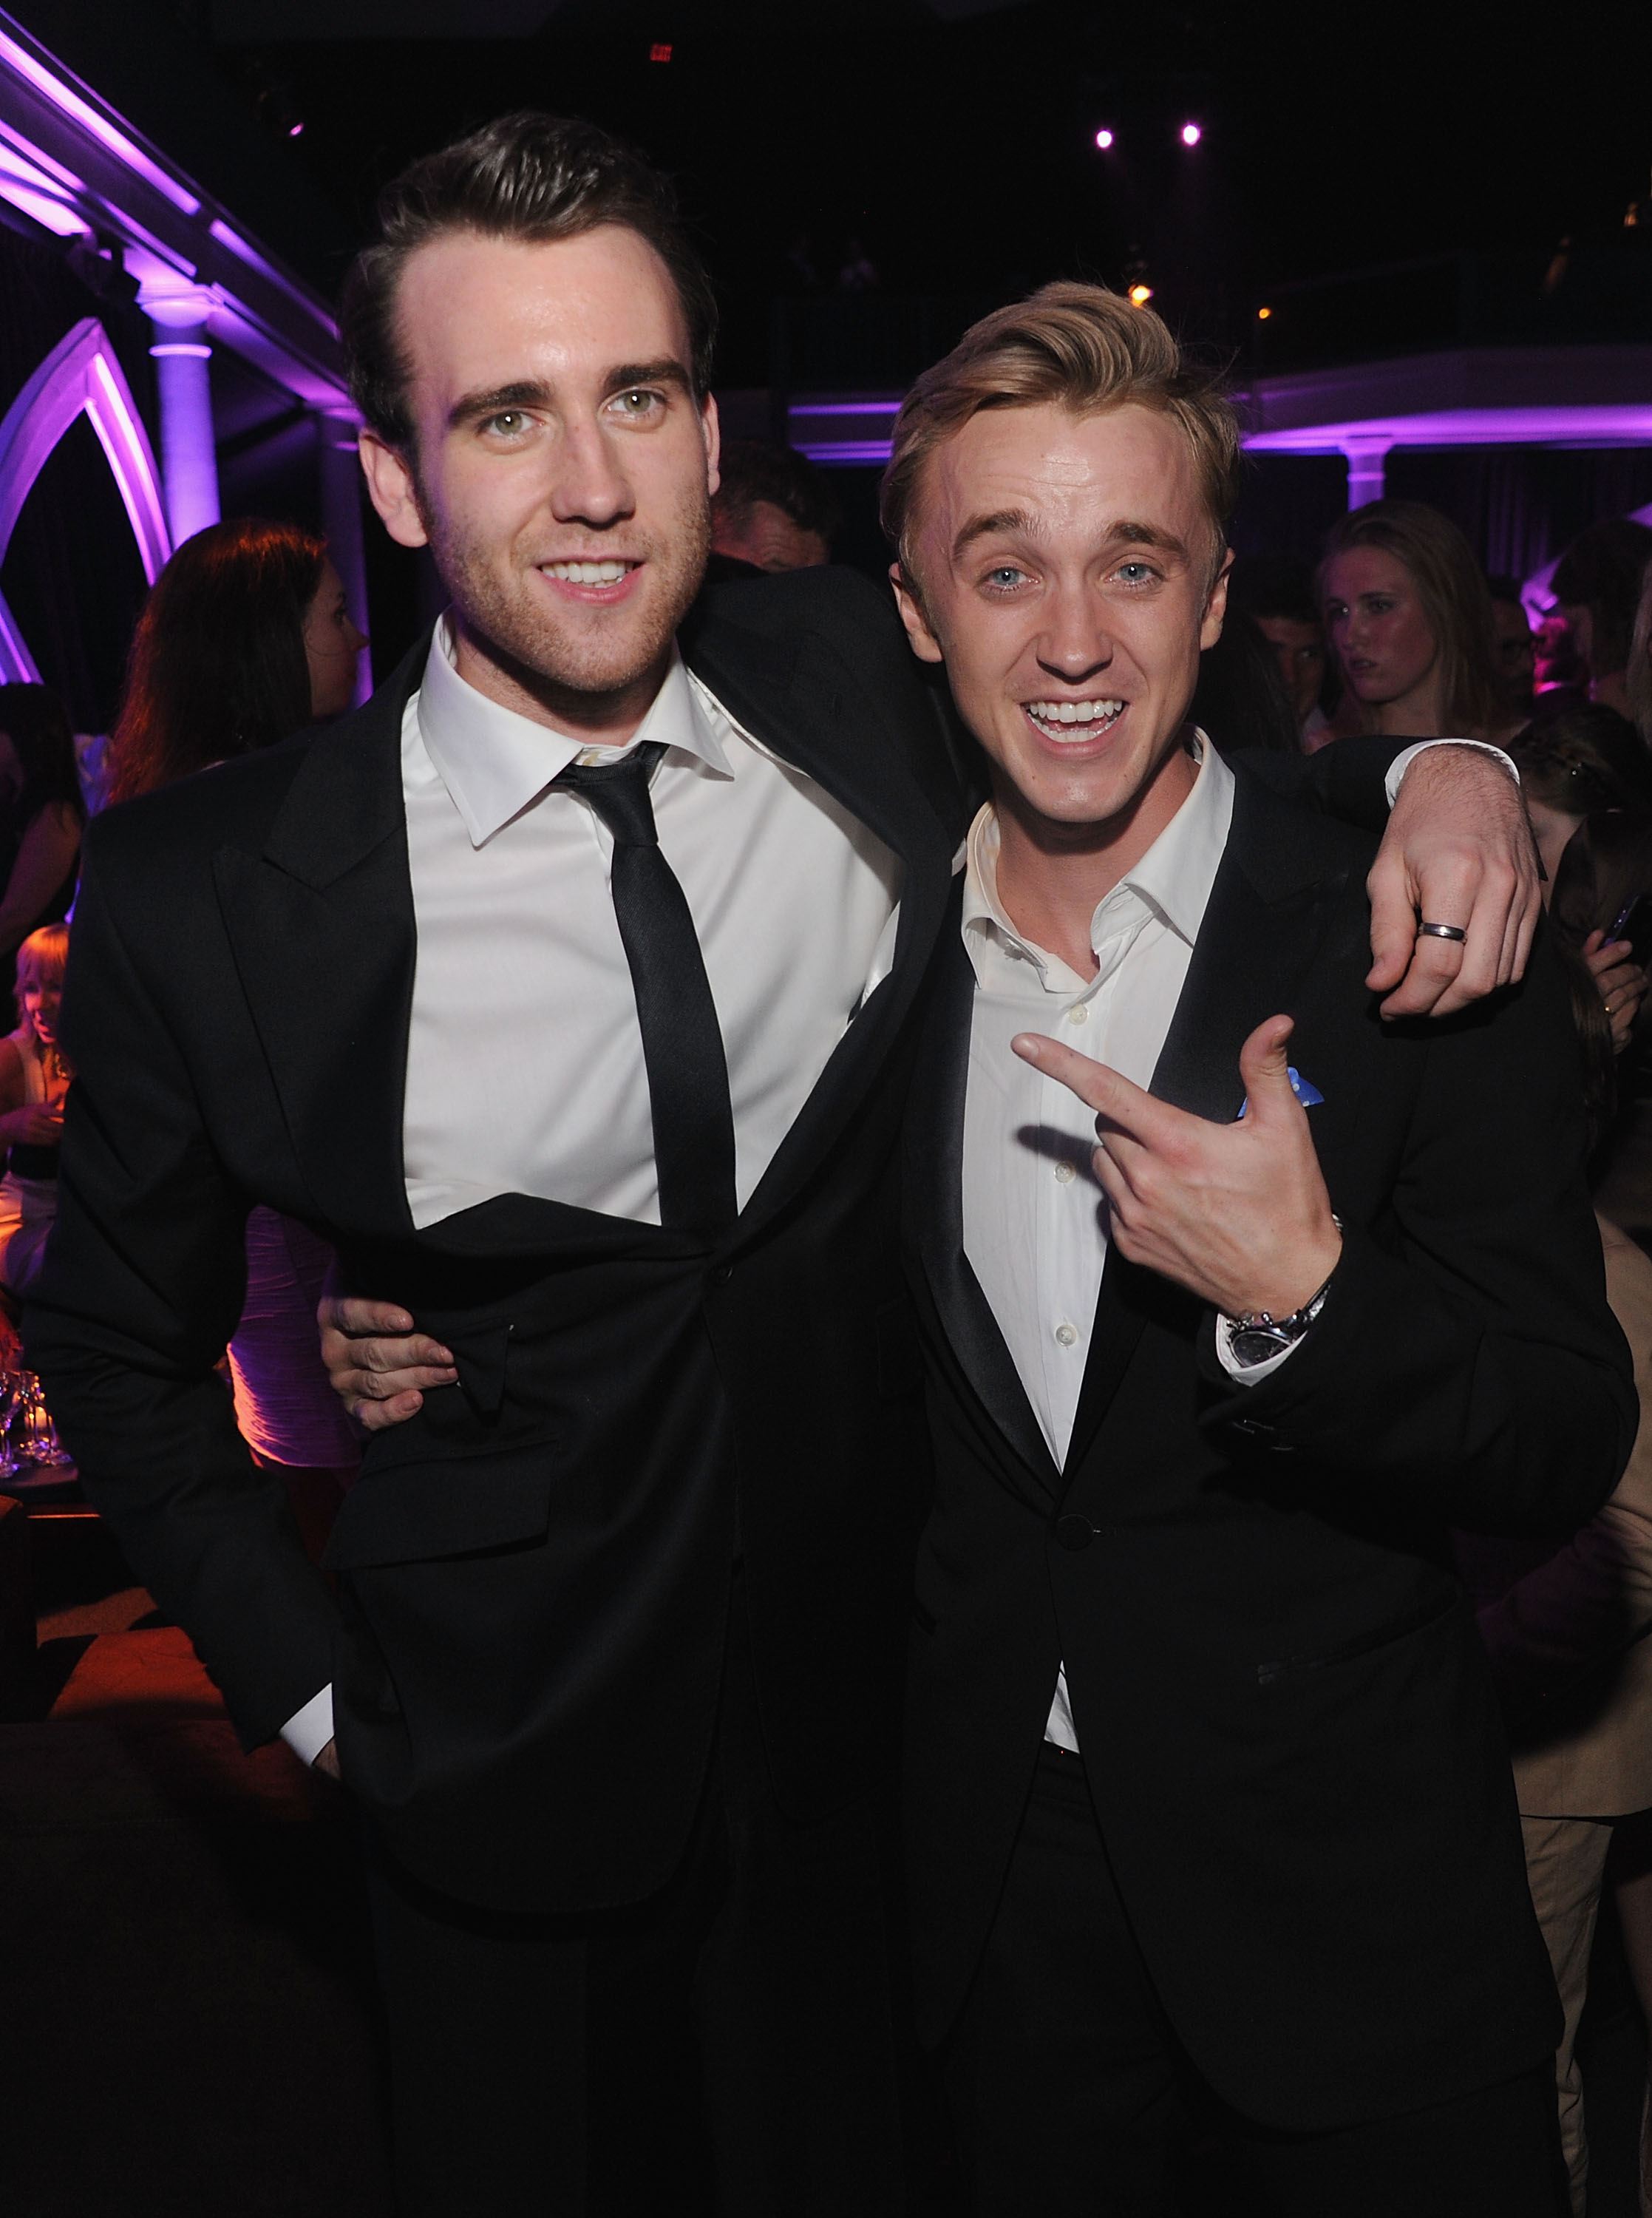 Matthew Lewis and Tom Felton at the after party for the premiere of "Harry Potter and the Deathly Hallows: Part 2" in New York City on July 11, 2011. (Dimitrios Kambouris—WireImage/Getty Images)